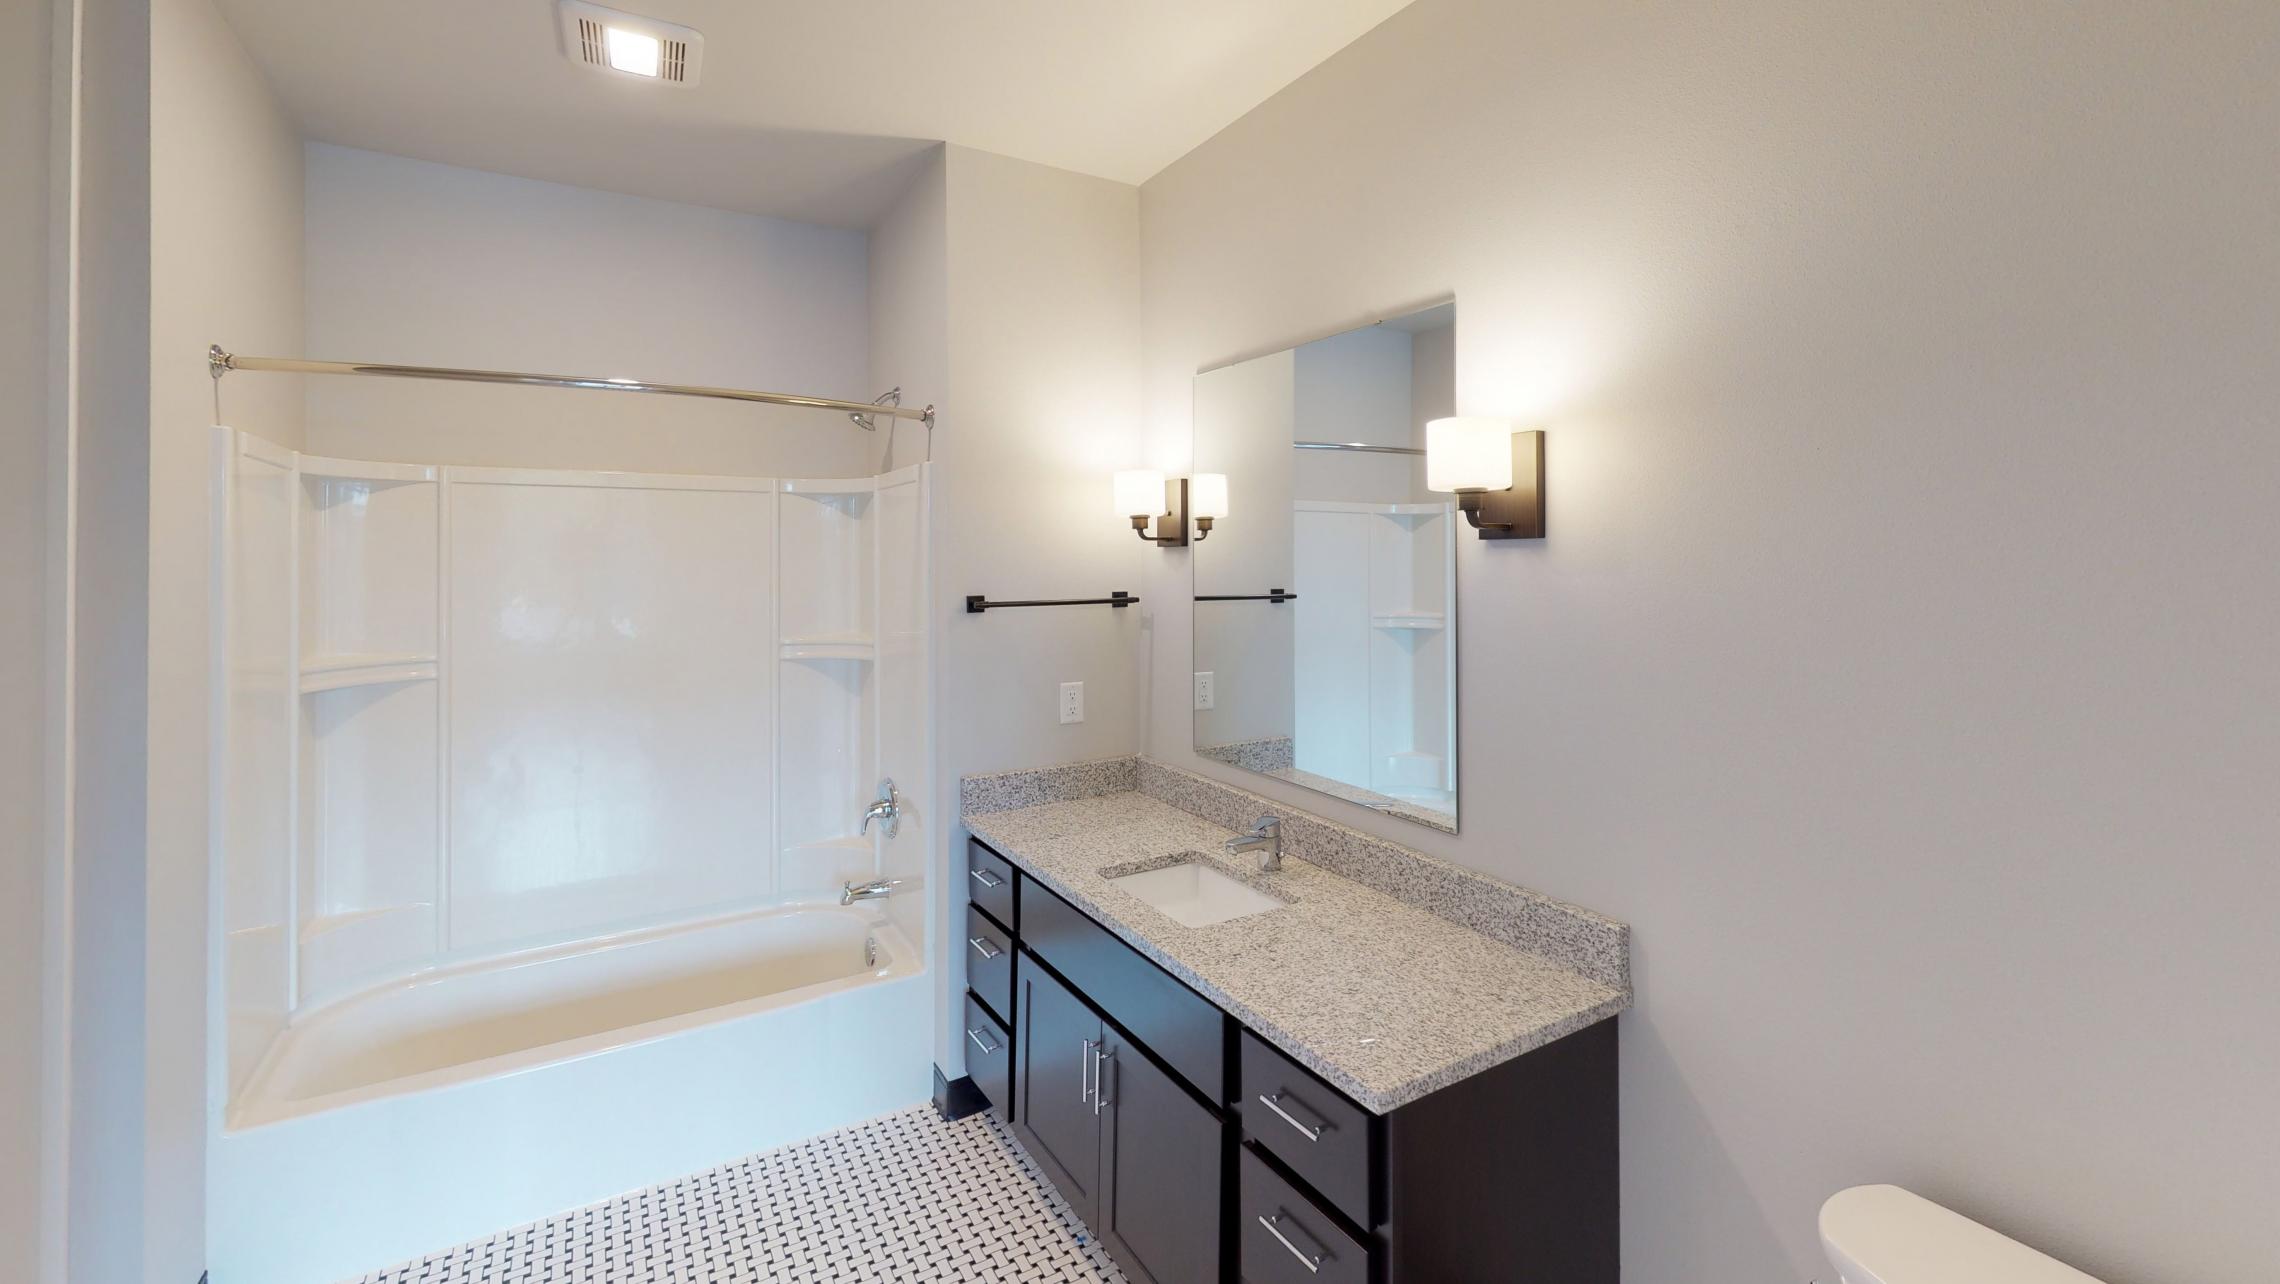 1722-Monroe-Apartment-313-One-Bedroom-Bathroom-Kitchen-Living-Sunny-Bright-Modern-Lifestyle-Cats-Dogs-Fitness-Terrace-Captiol-Madison-City-Upscale-Design